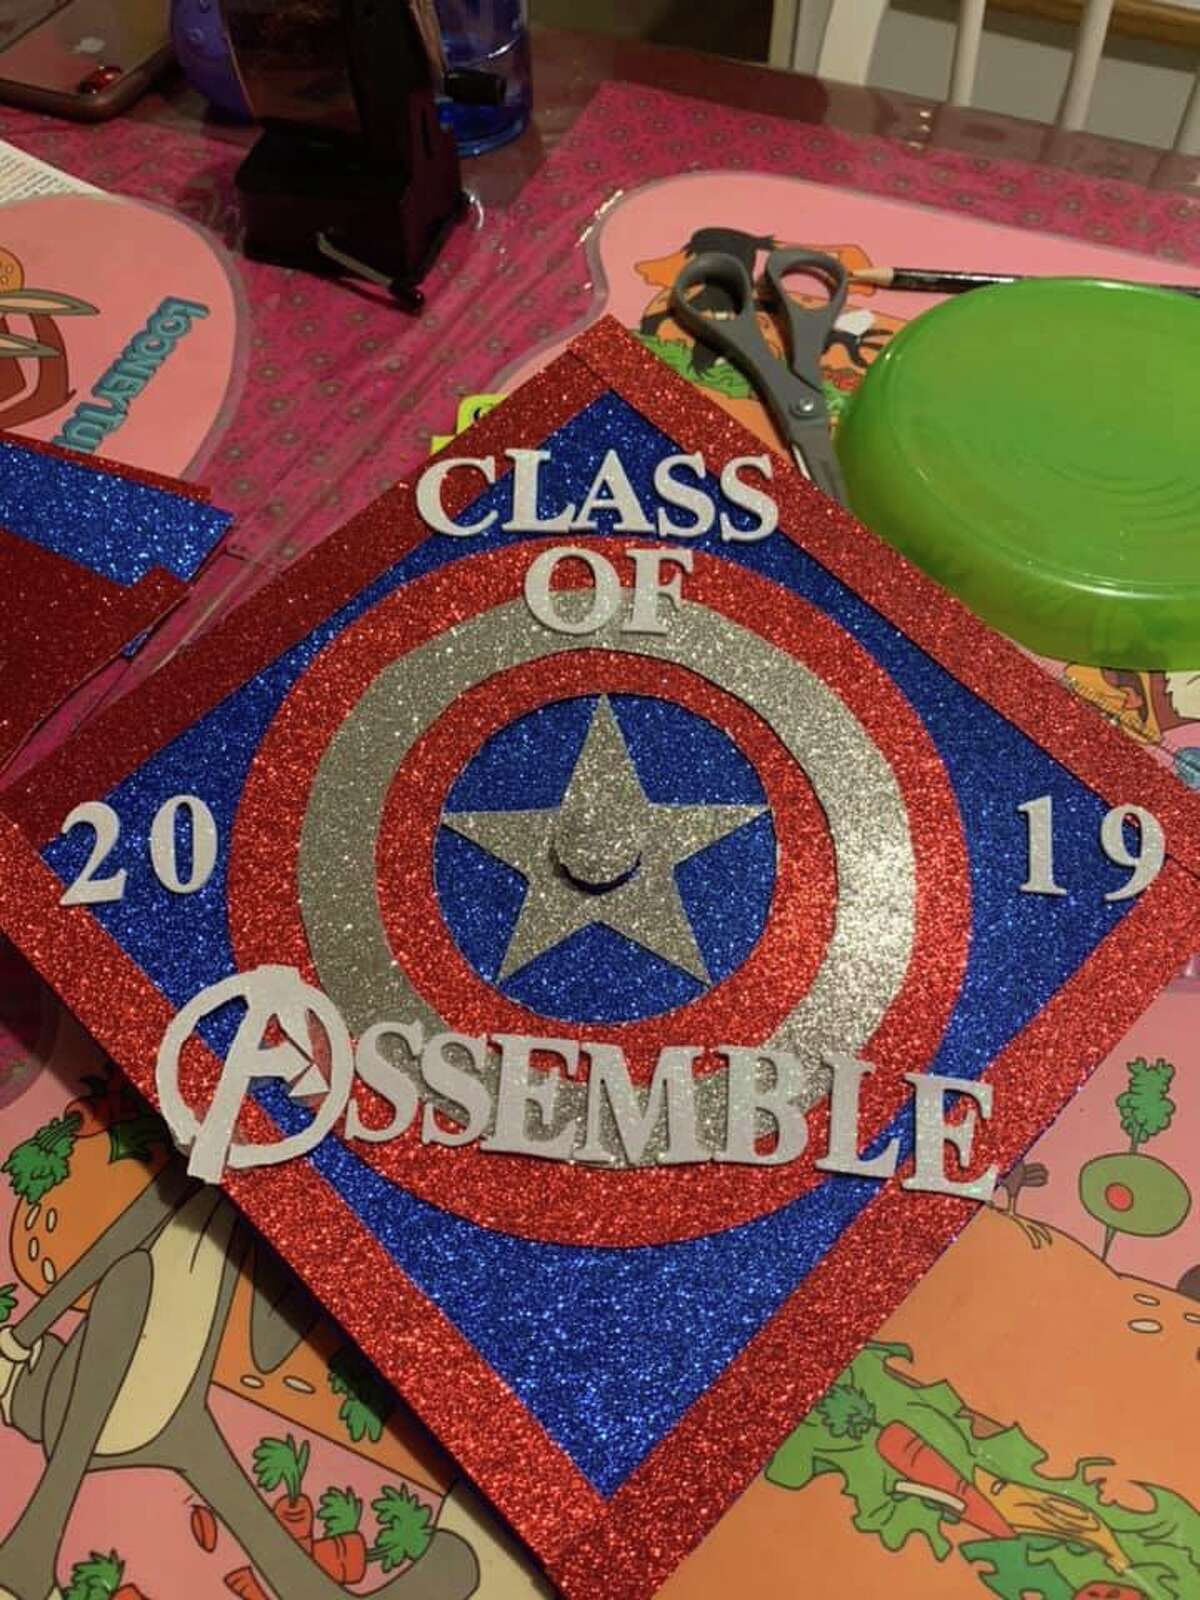 Graduation cap picture submitted by Laura Villanueva on Wednesday, May 22, 2019.